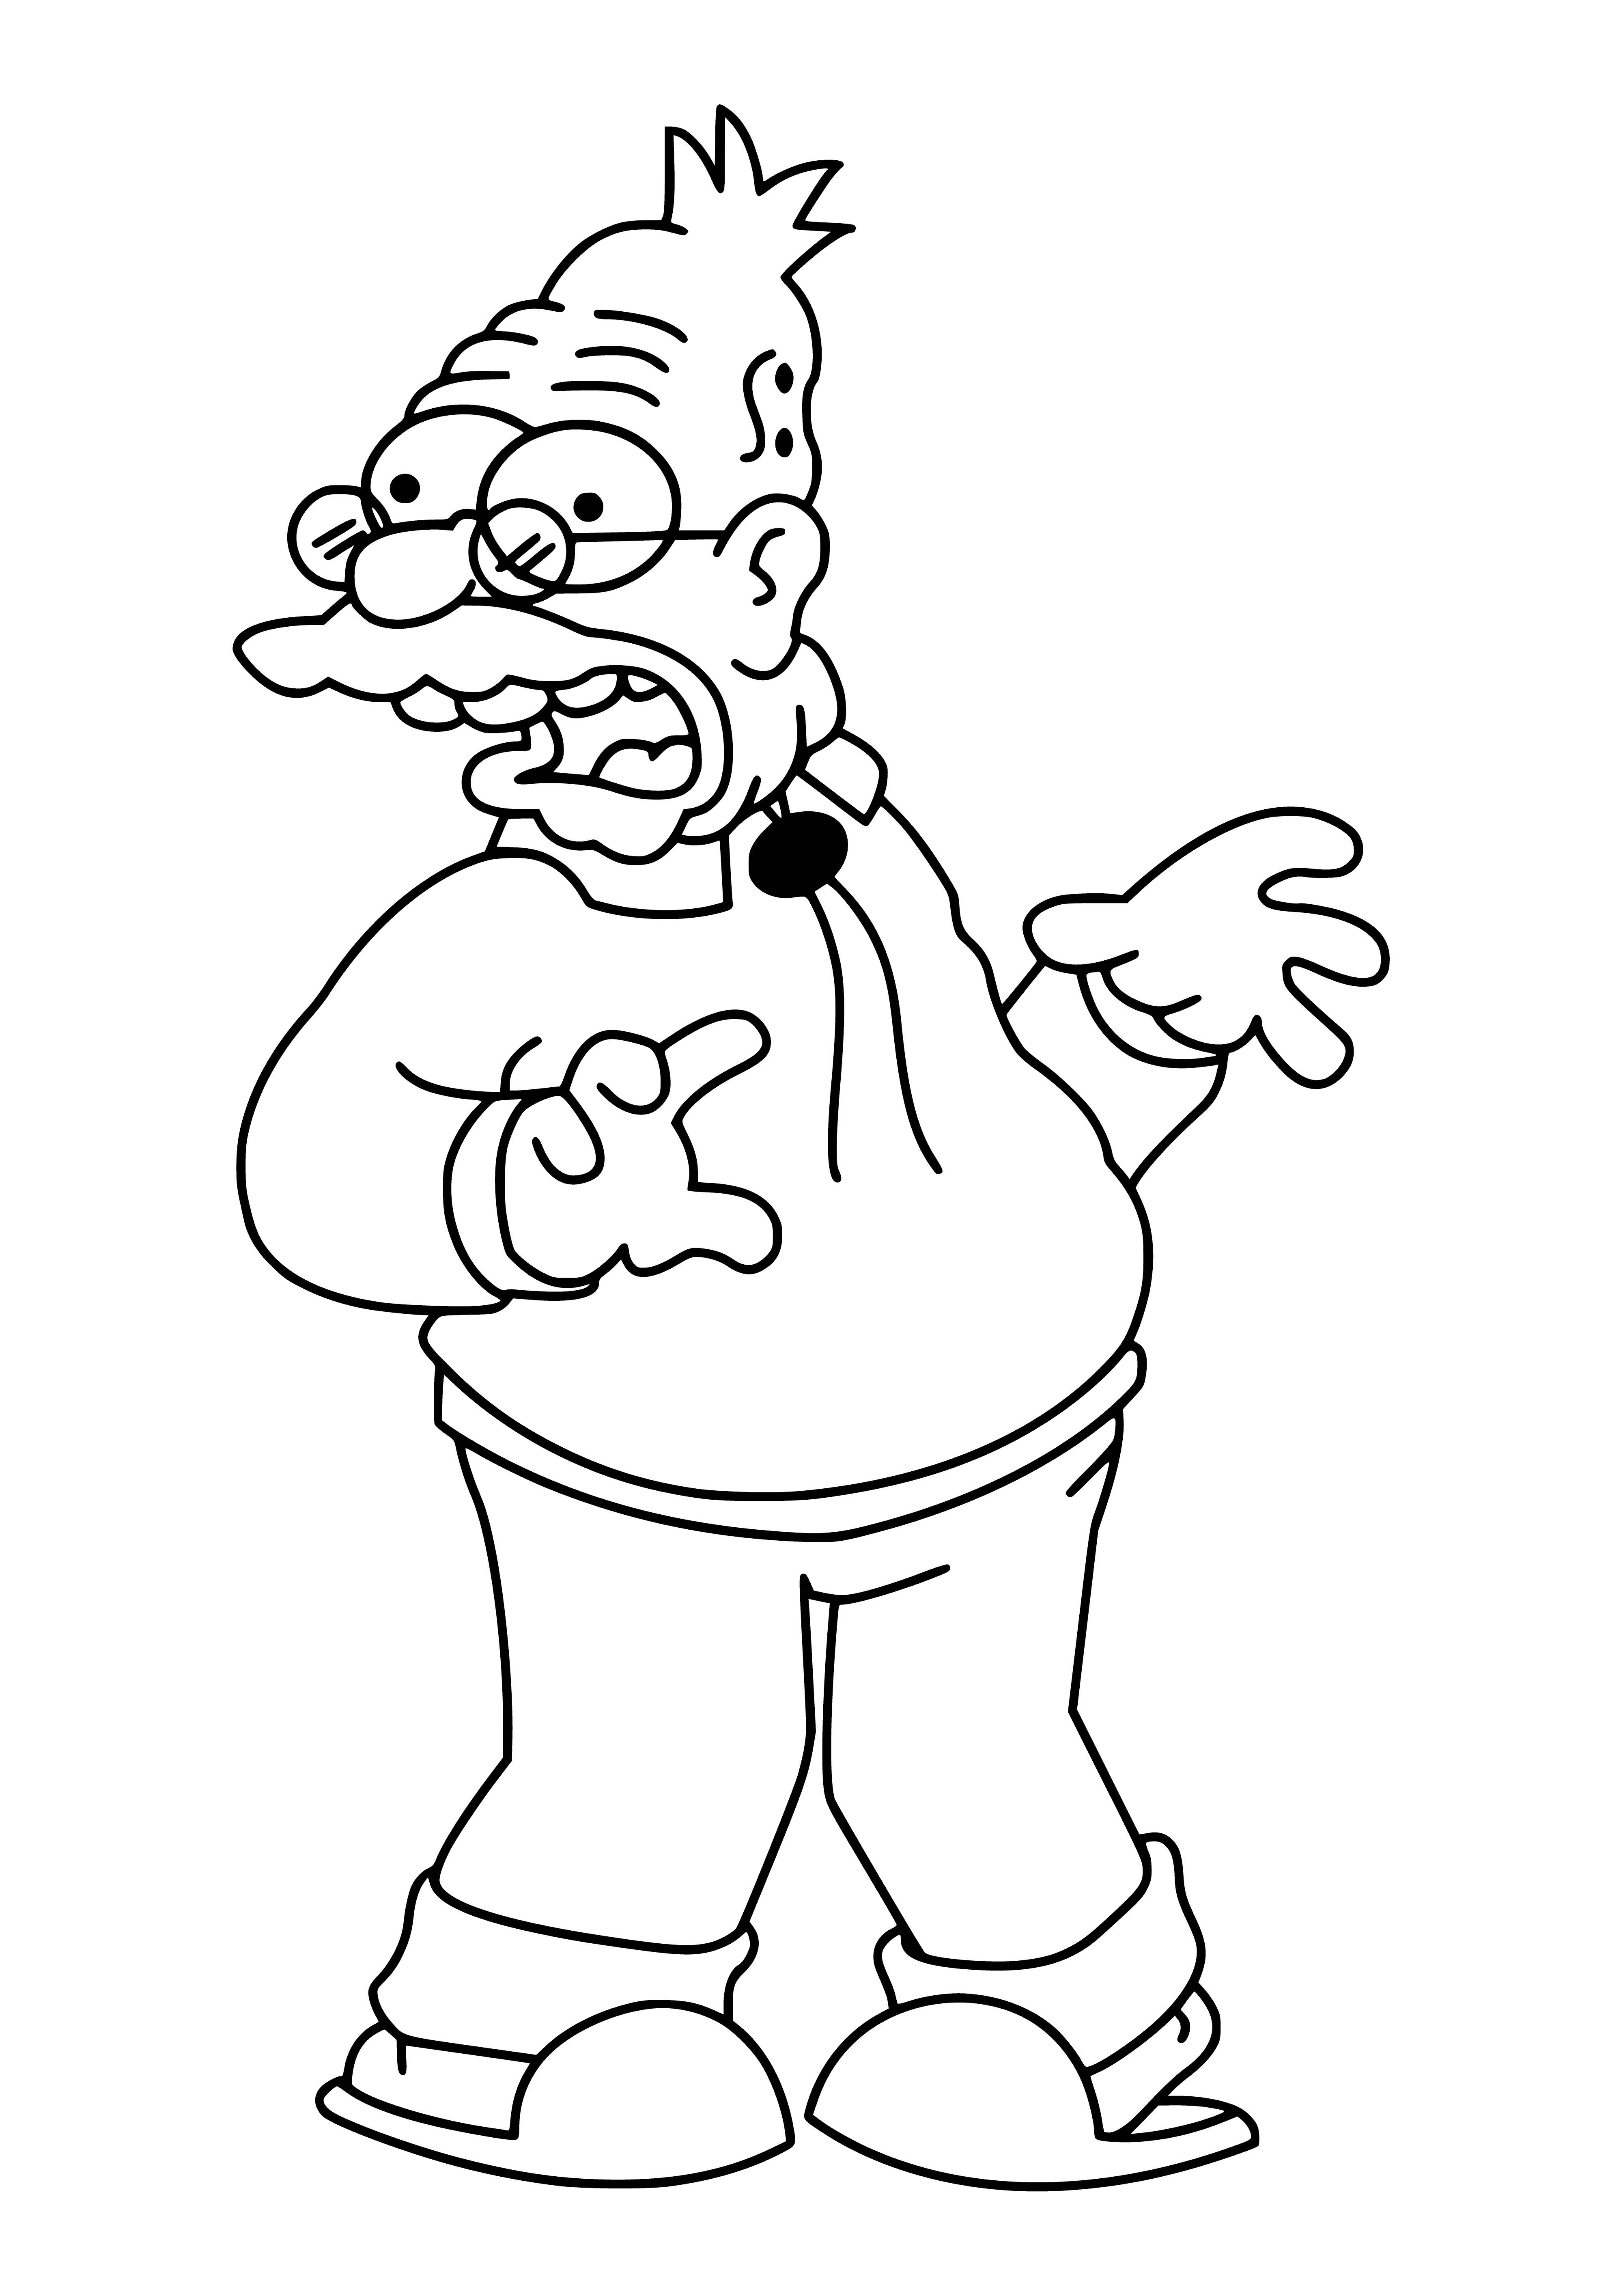 coloring page: Abraham Simpson is the father of Homer & grandfather of Bart, Lisa & Maggie; an elderly man with gray hair & mustache wearing glasses & a white shirt with a black tie, seated in a wheelchair.